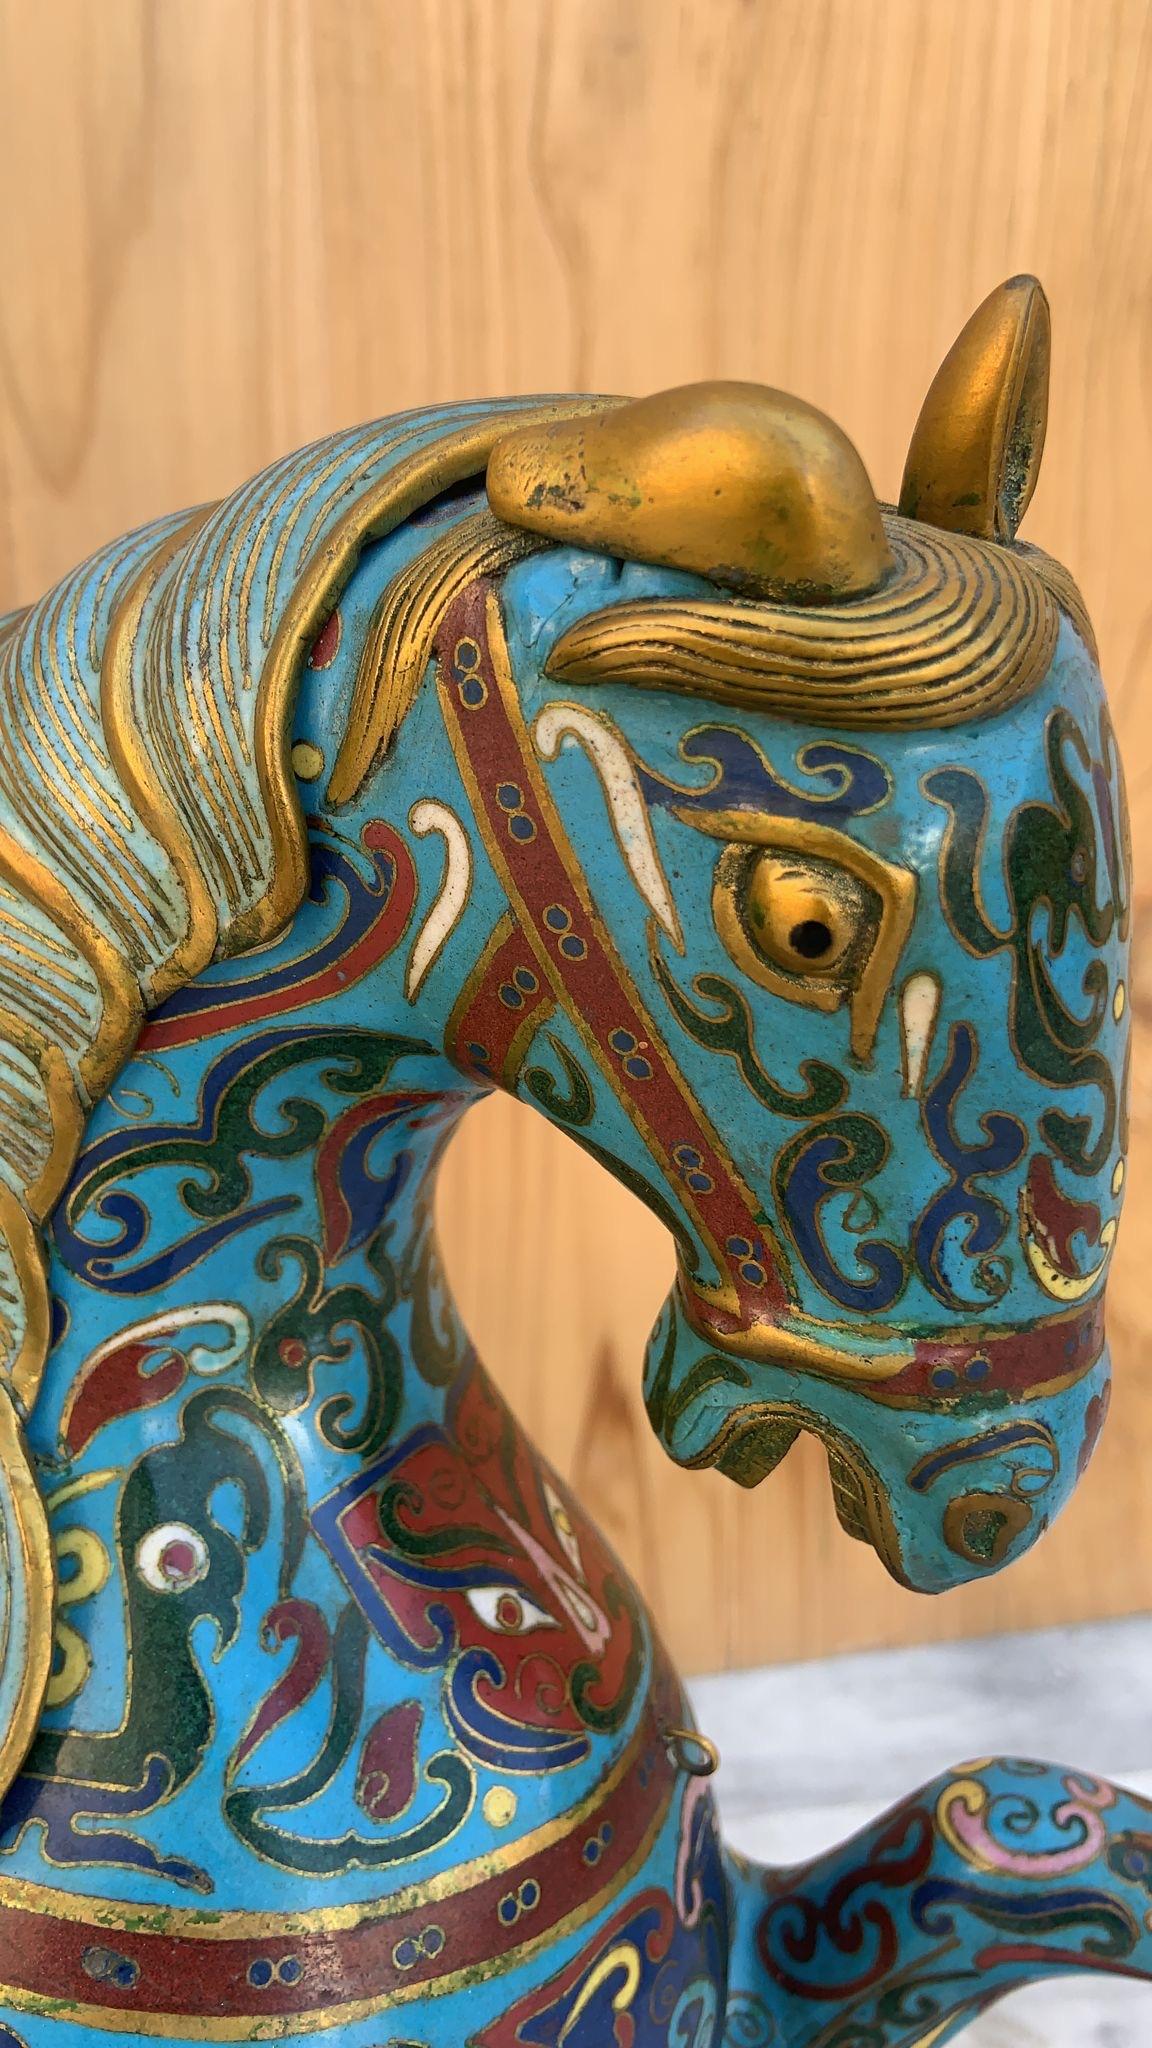 Vintage Chinese Cloisonné War Horse Sculptures on Mahogany Base - Pair In Good Condition For Sale In Chicago, IL